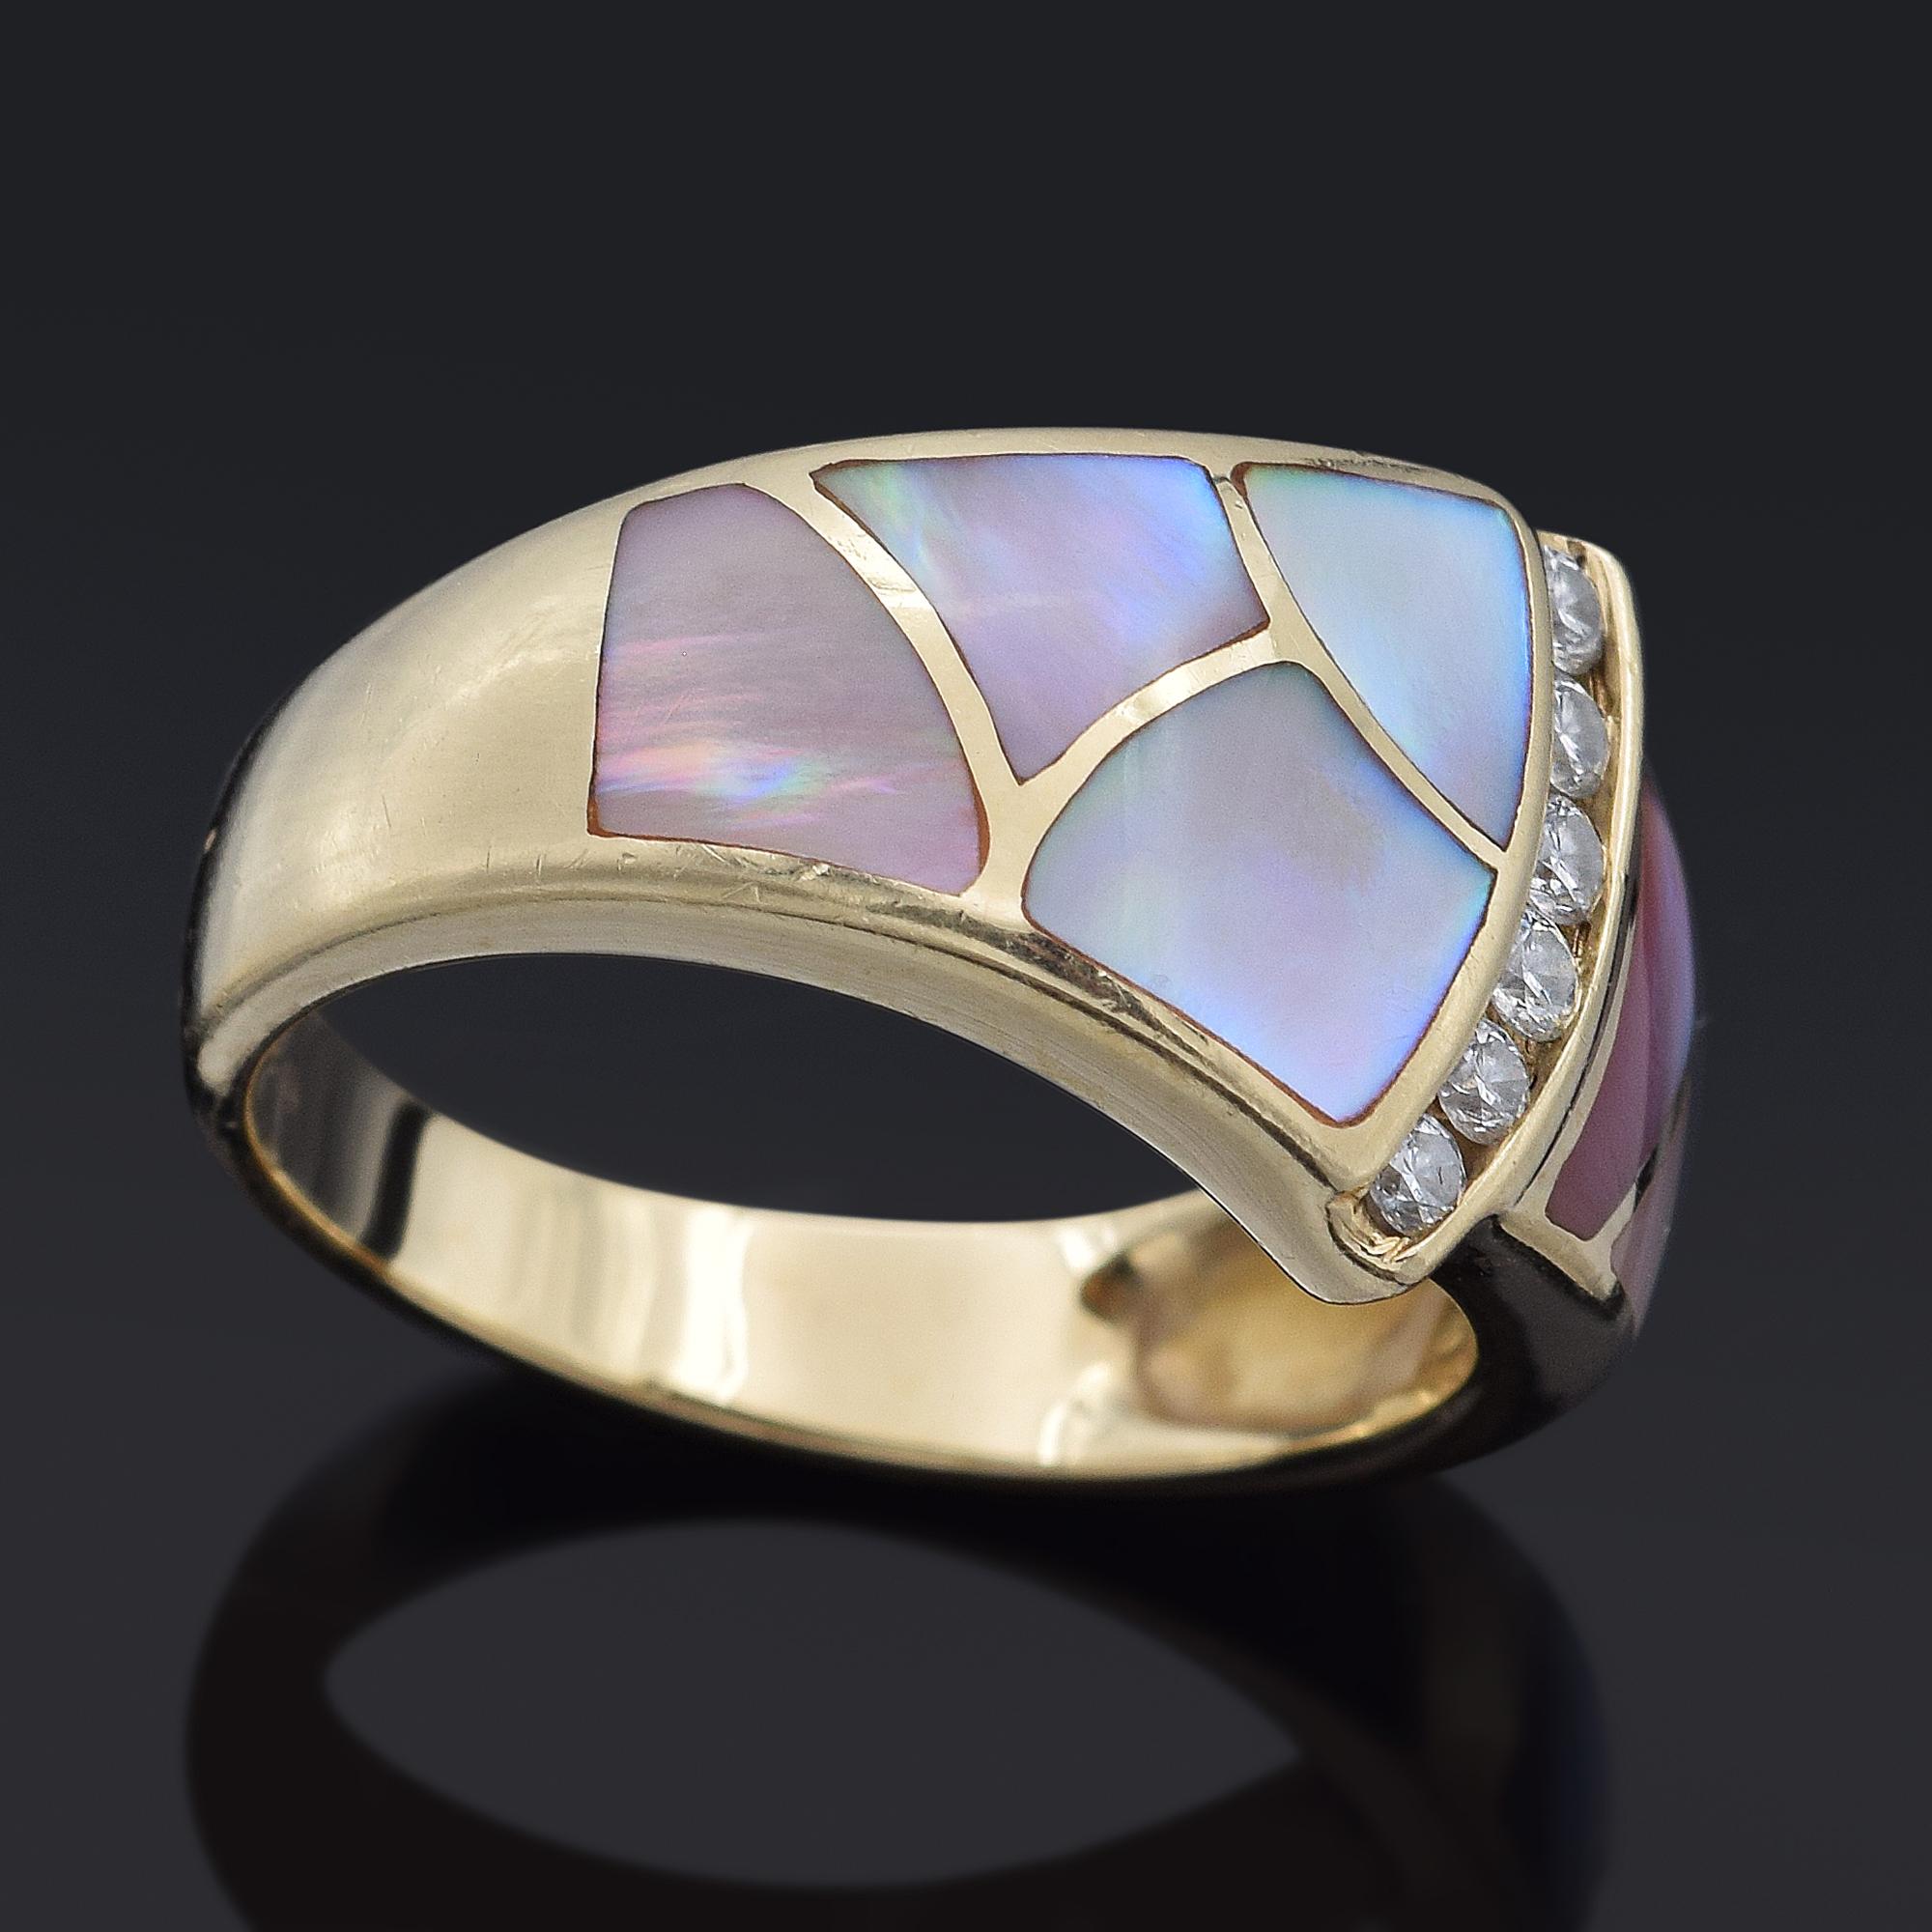 Weight: 5.7 Grams
Stone: Mother of Pearl & Approx 0.15 TCW (0.025 ct) Diamonds
Face of Ring: 21.5 x 12.5 x 3.4 mm
Ring Size: 7
Hallmark: 14K Ash

ITEM #:BR-1062-092823-02
